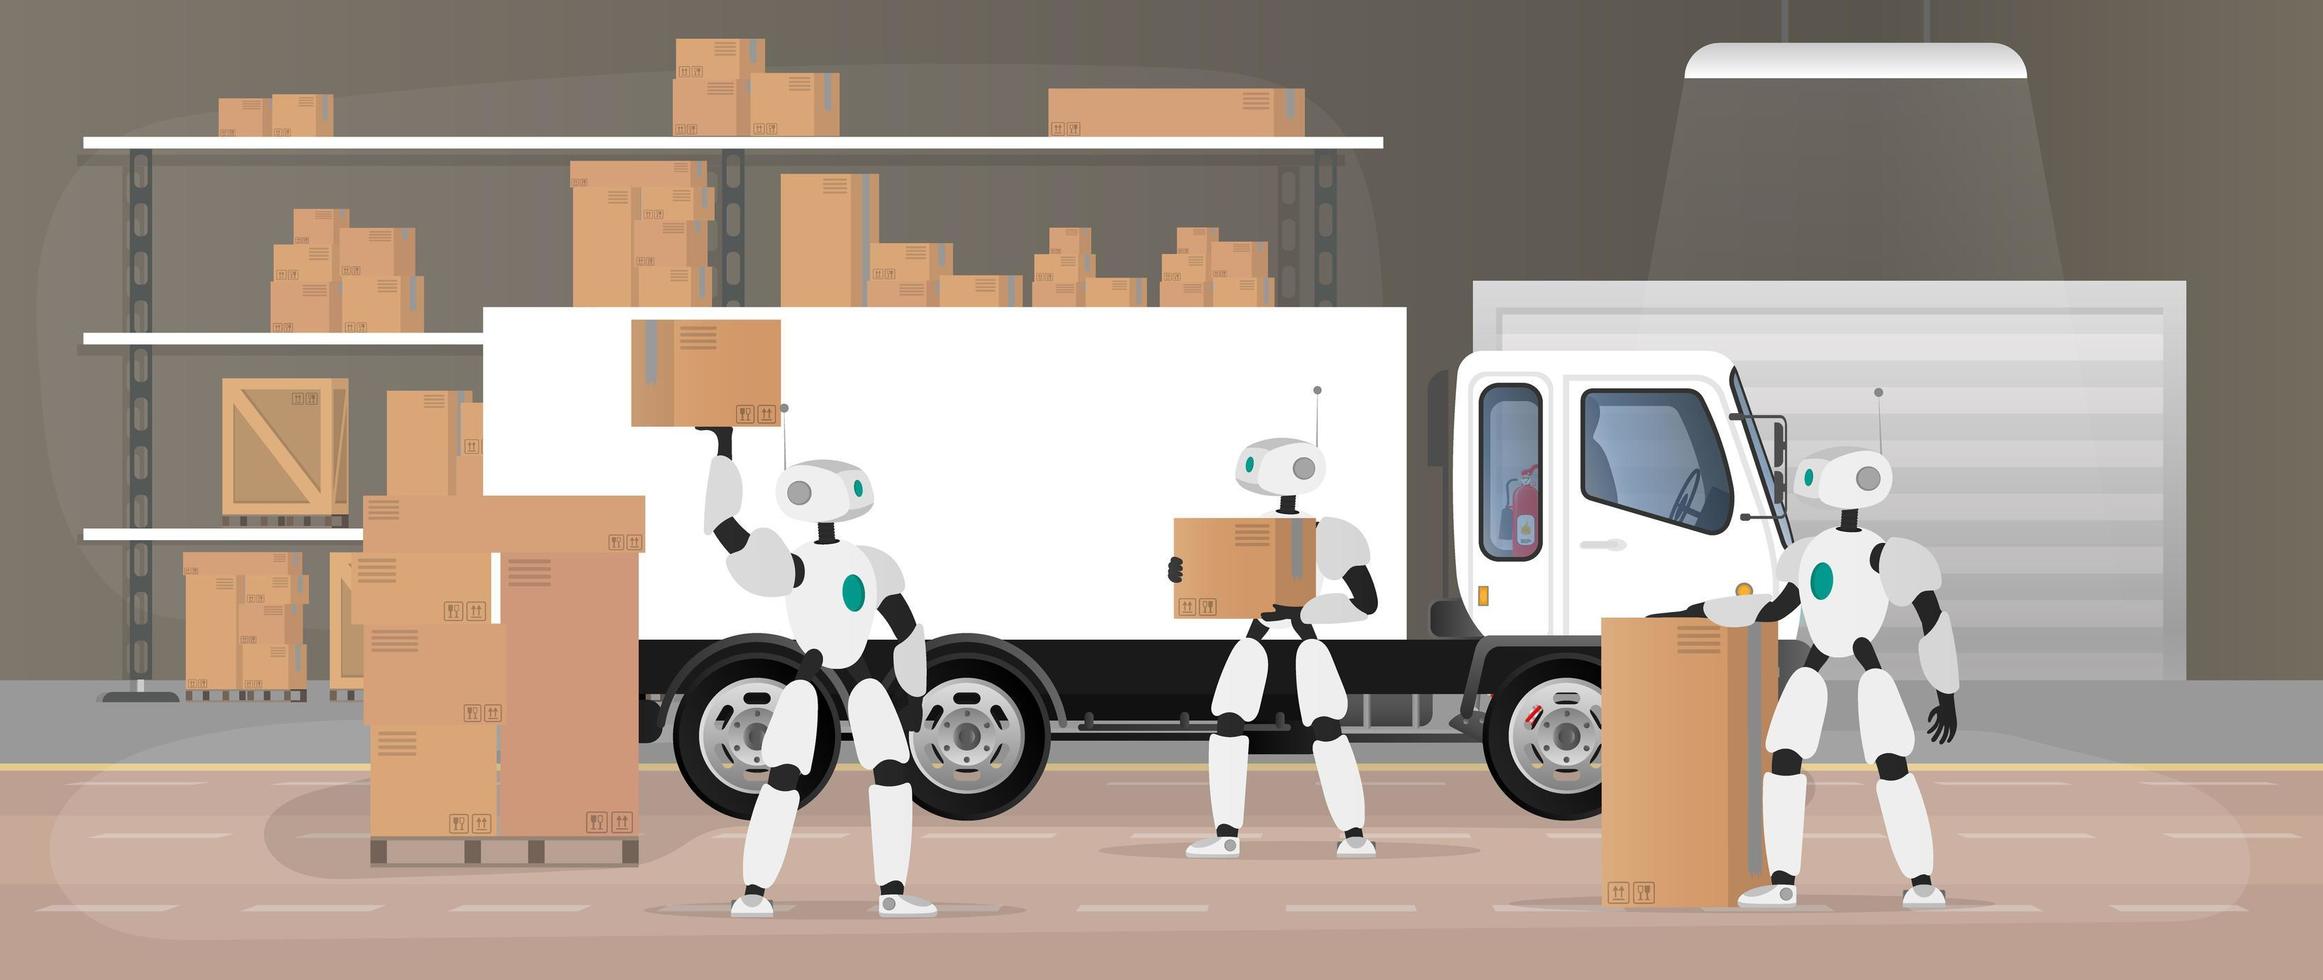 Robots work in a manufacturing warehouse. Robots carry boxes and lift the load. Futuristic concept of delivery, transportation and loading of goods. Large warehouse with boxes and pallets. Vector. vector